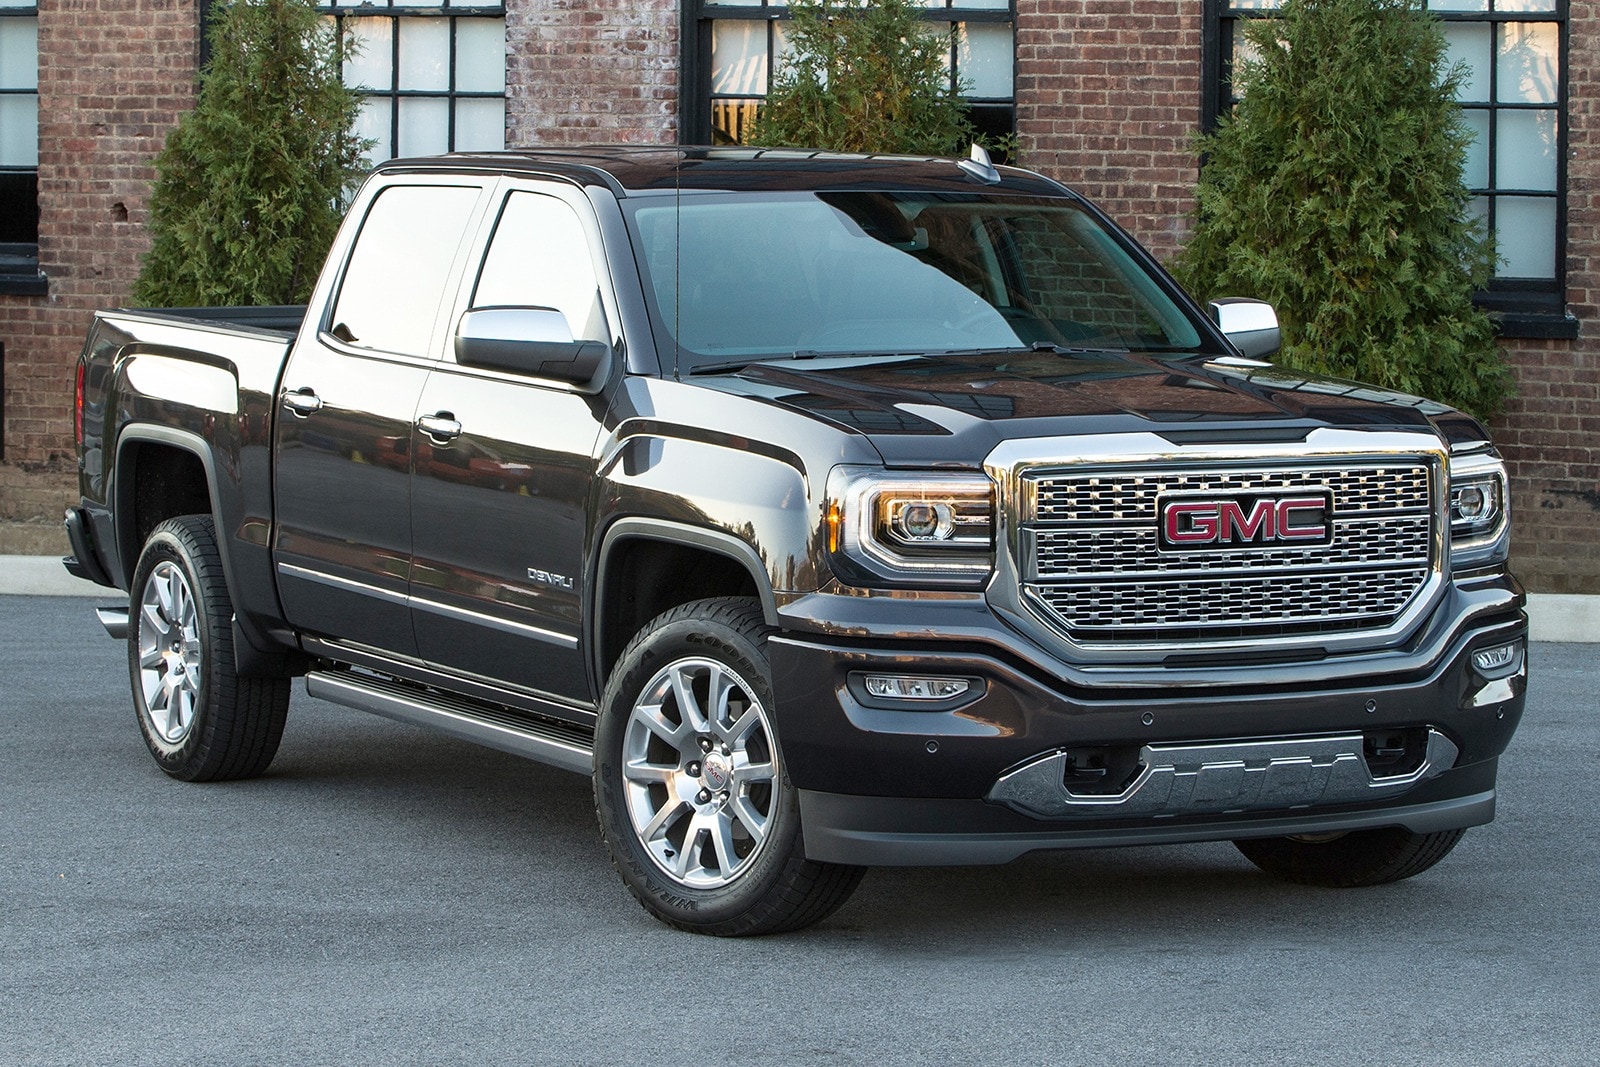 Used 2016 GMC Sierra 1500 Crew Cab Review | Edmunds